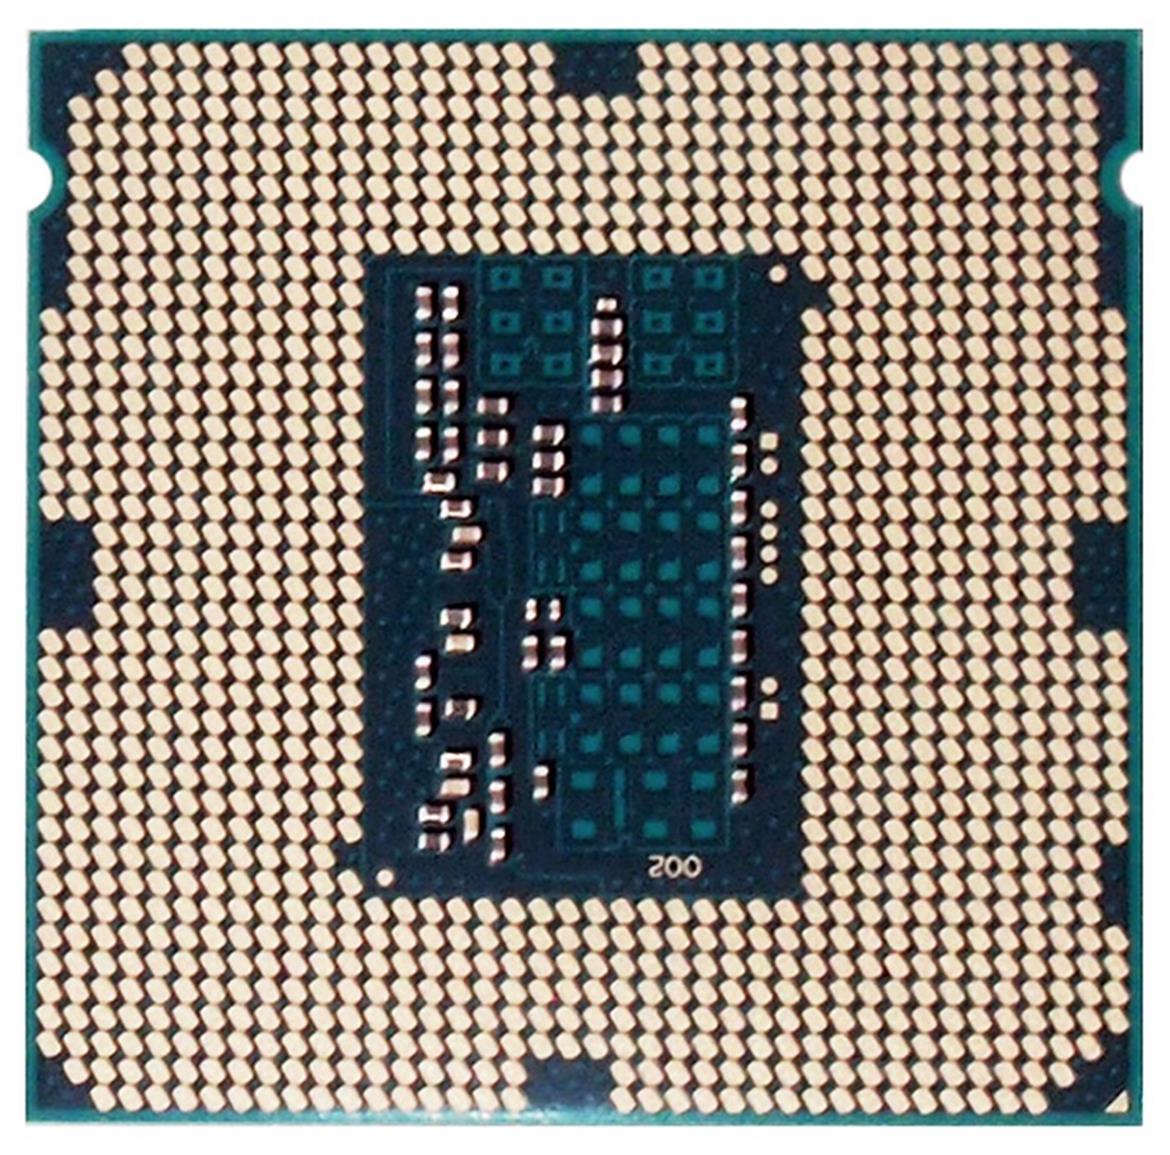 Intel Core i7-4770K Review: Haswell Has Landed